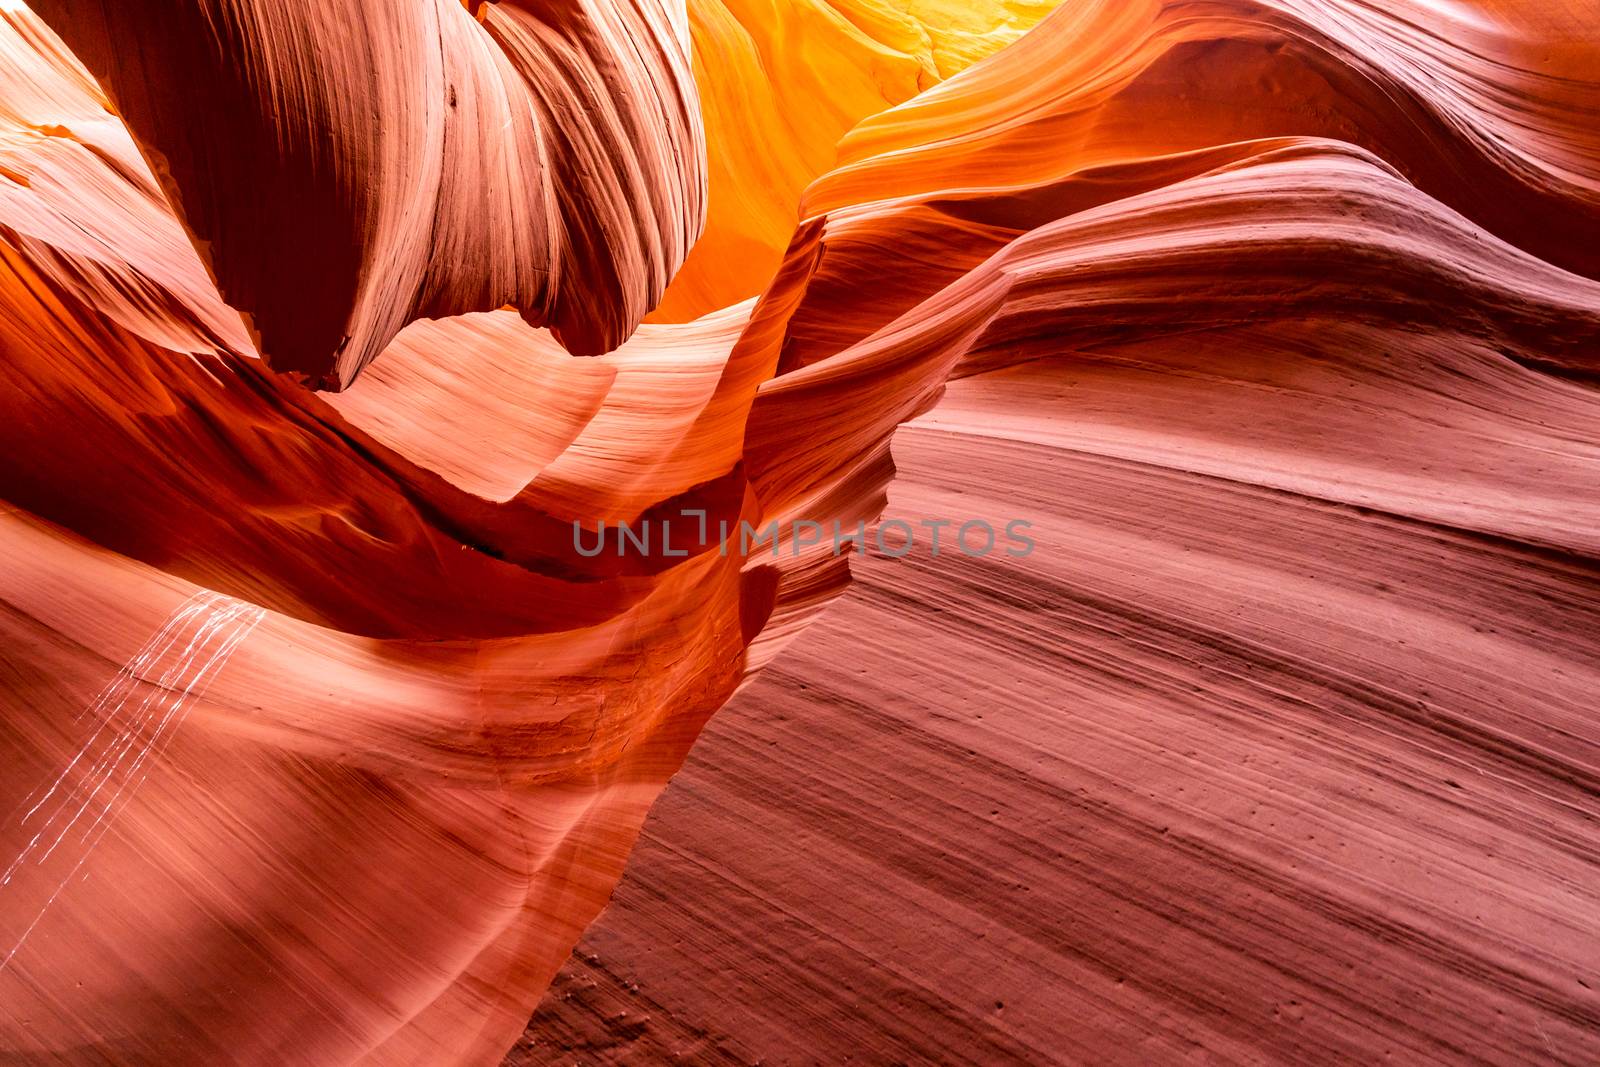 Lower Antelope Canyon by vichie81